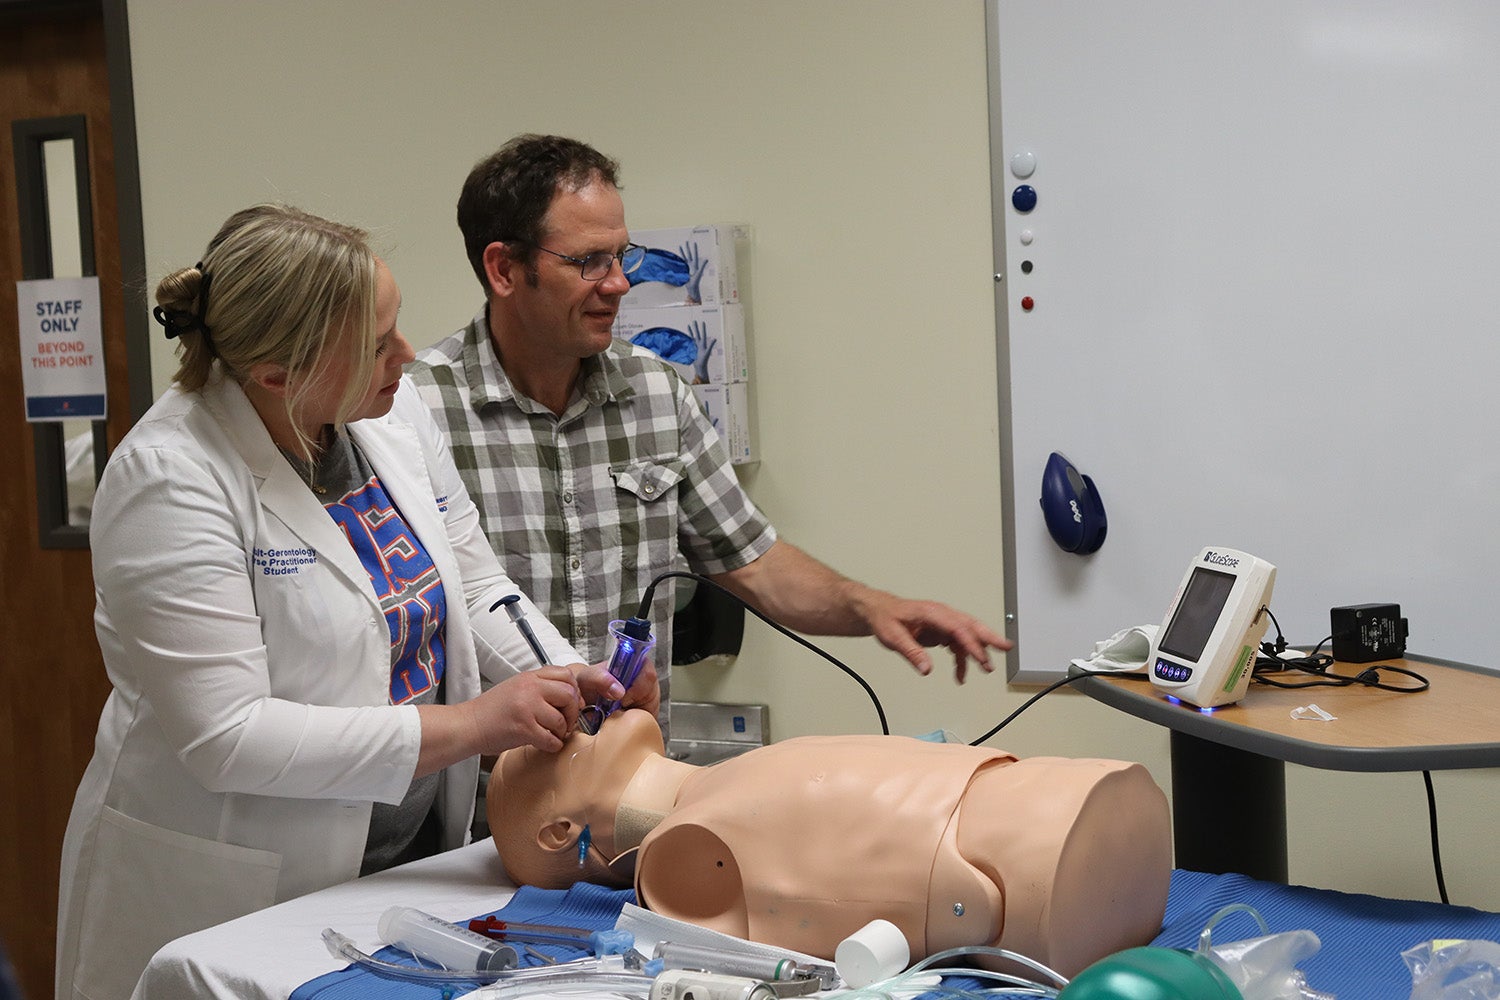 A nurse practitioner student practices intubation on a manikin.